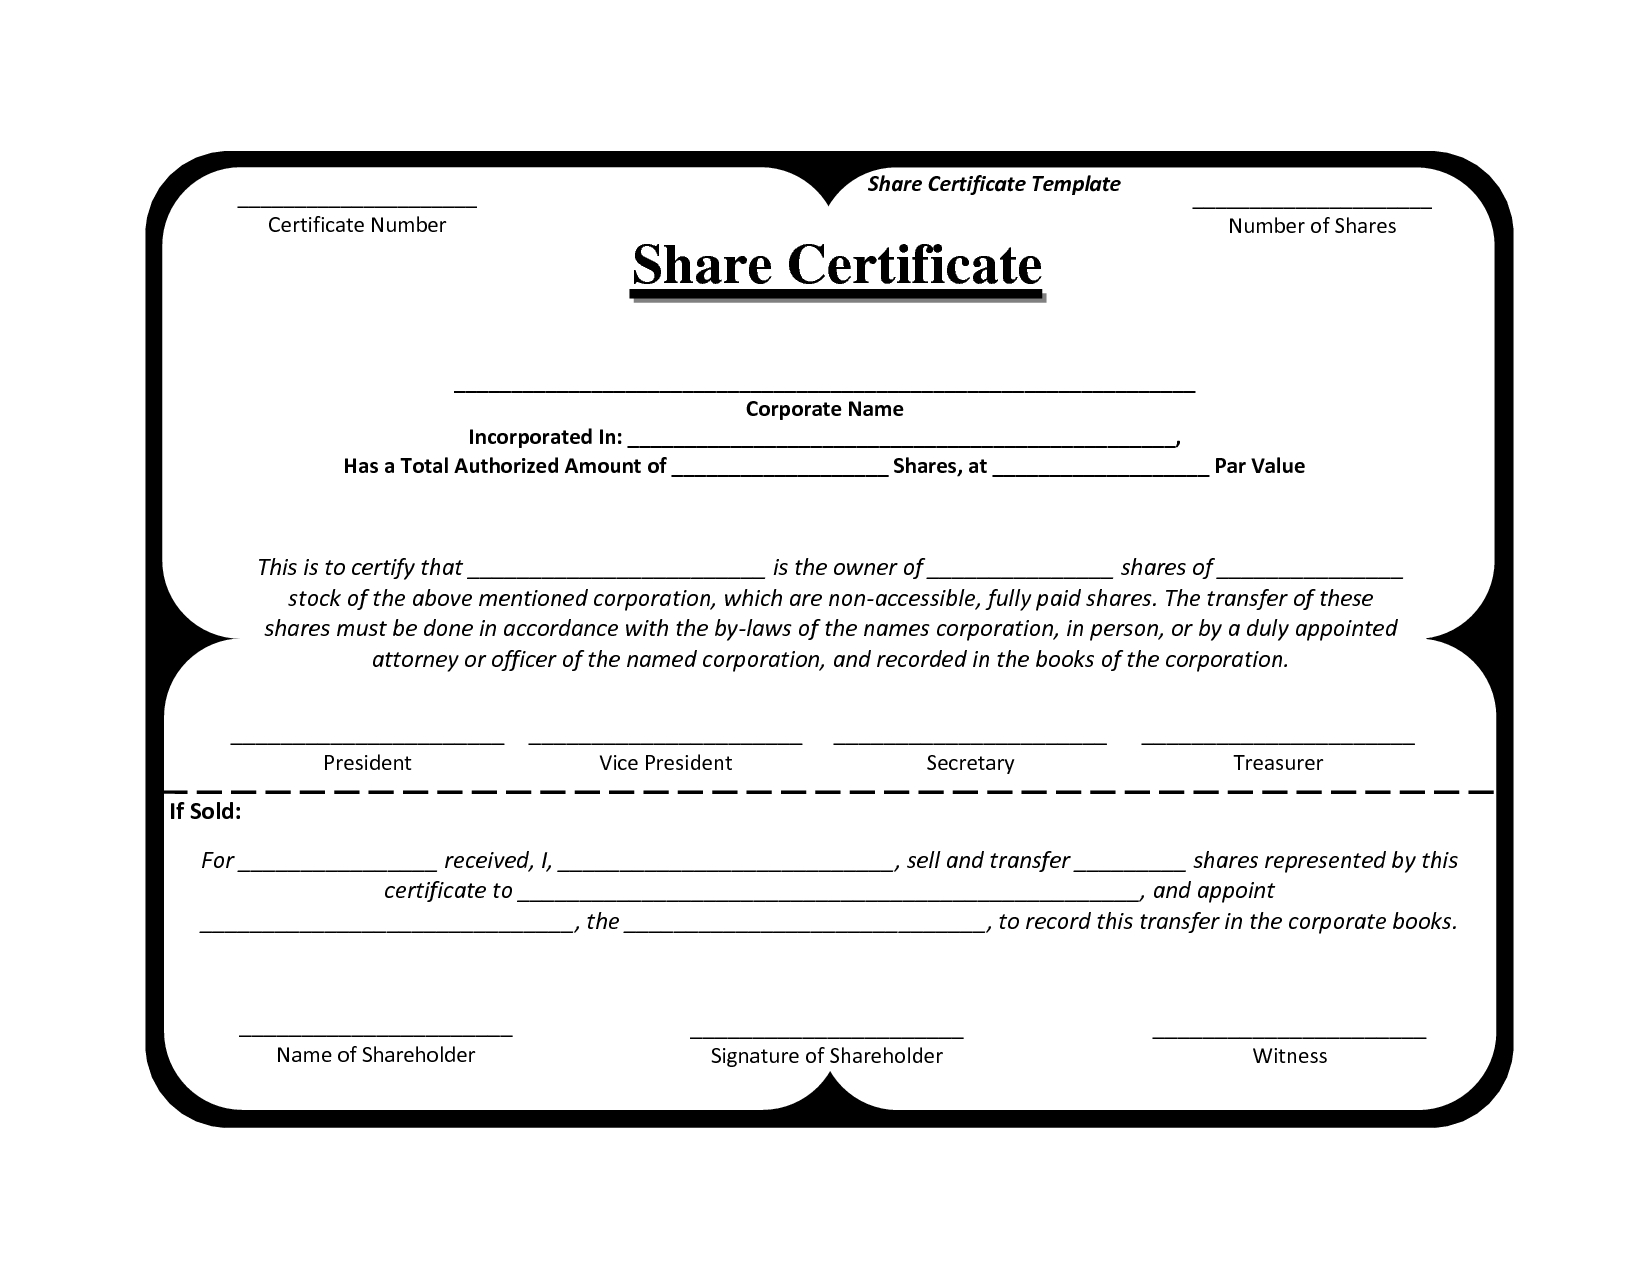 Template Share Certificate Rbscqi9V | Share Certificate In Inside Corporate Share Certificate Template